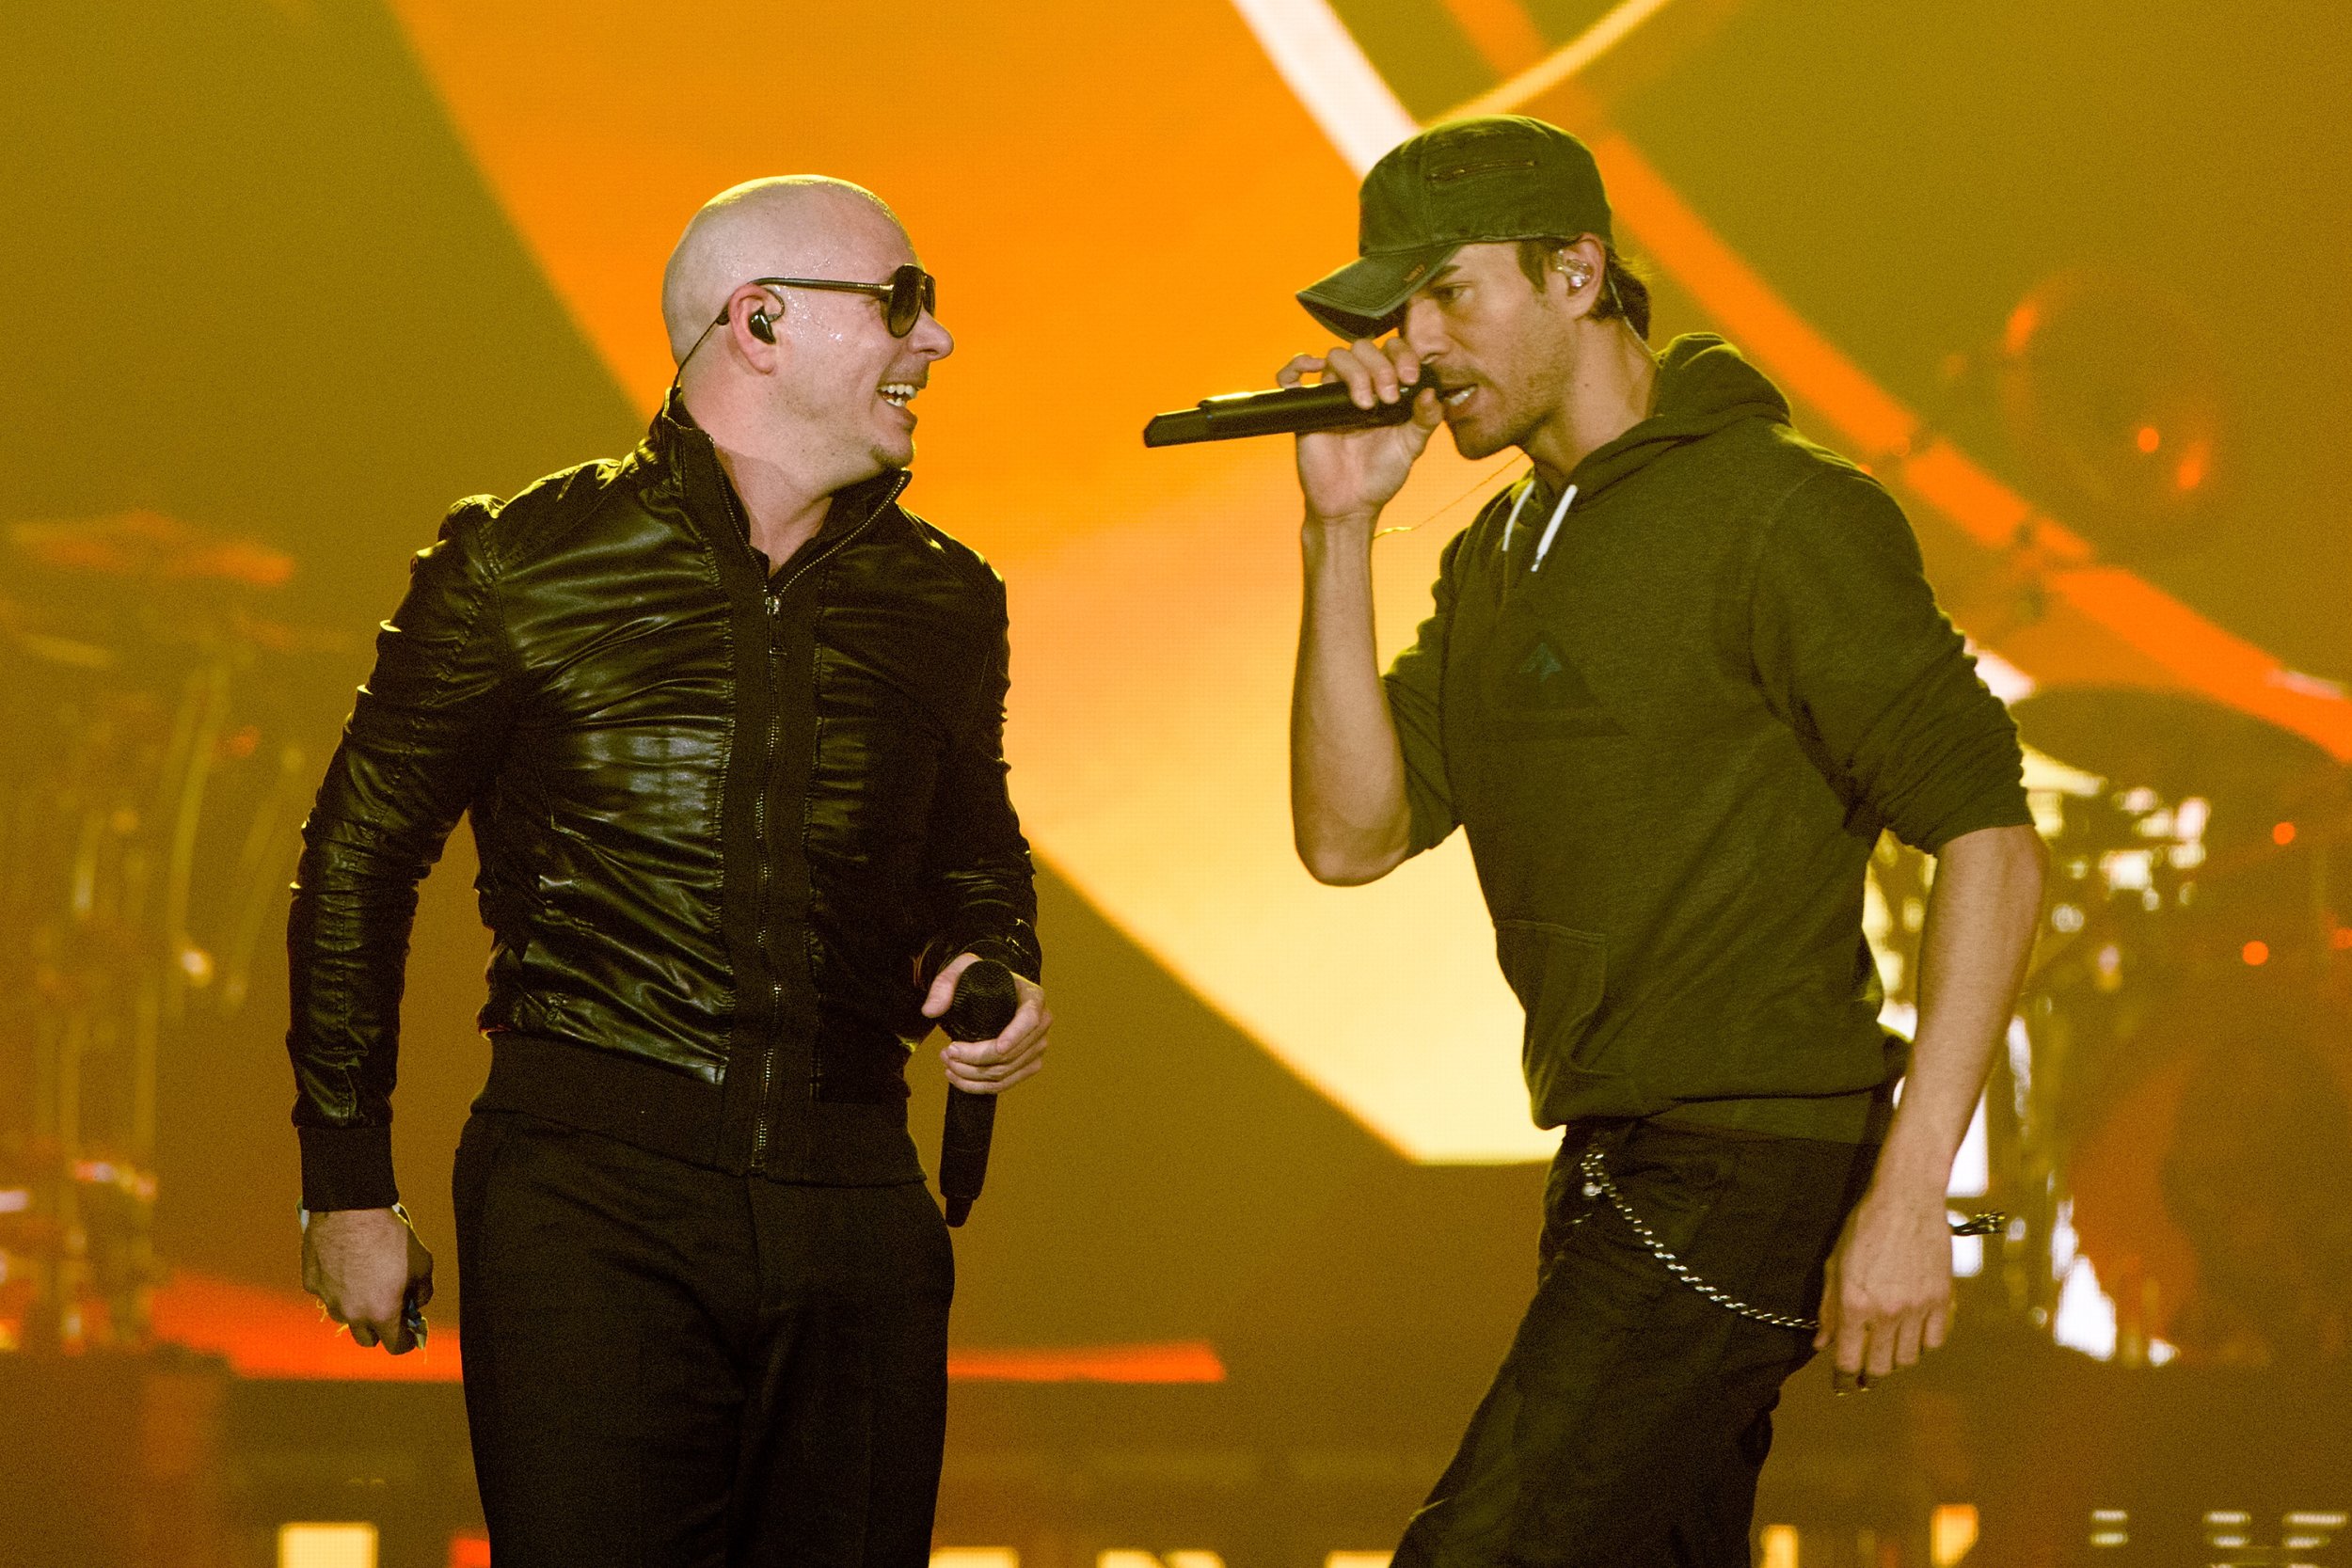 How To Get Pitbull And Enrique Iglesias 2017 Tour Tickets US Dates